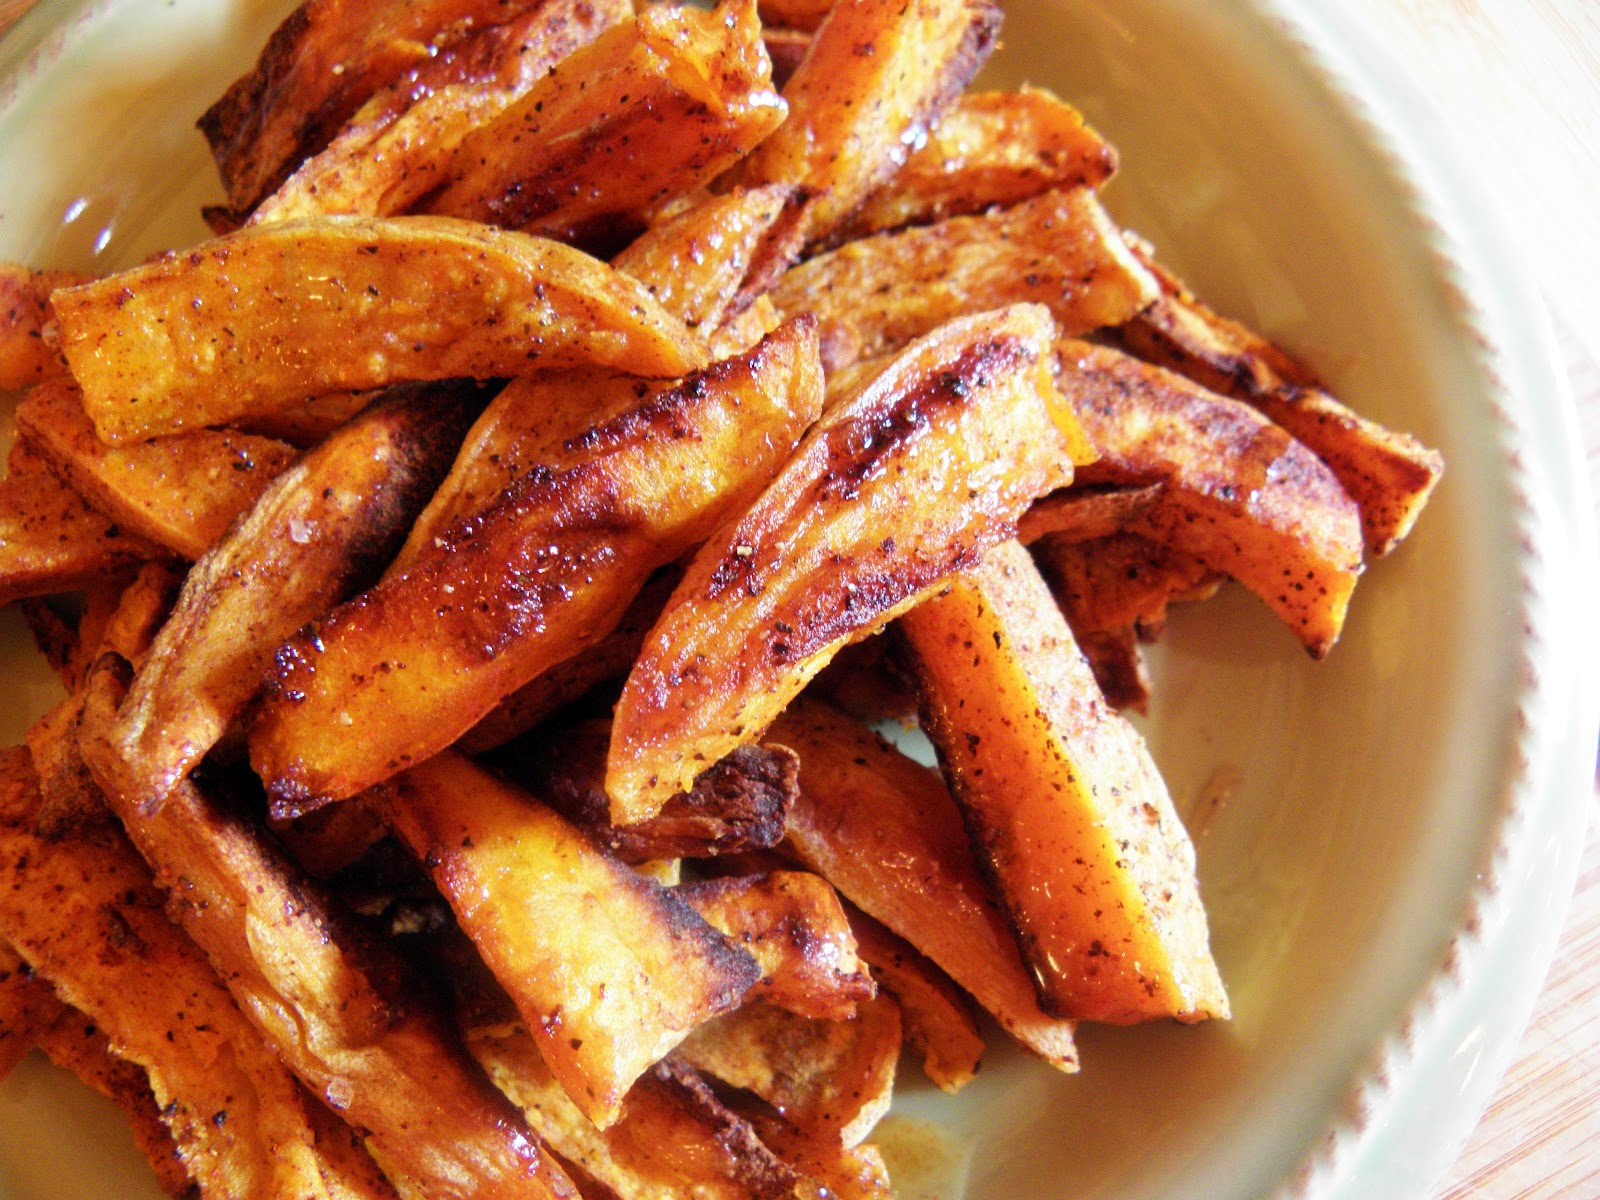 18. Healthy Spiced Sweet Potato Fries Inspired by Family.